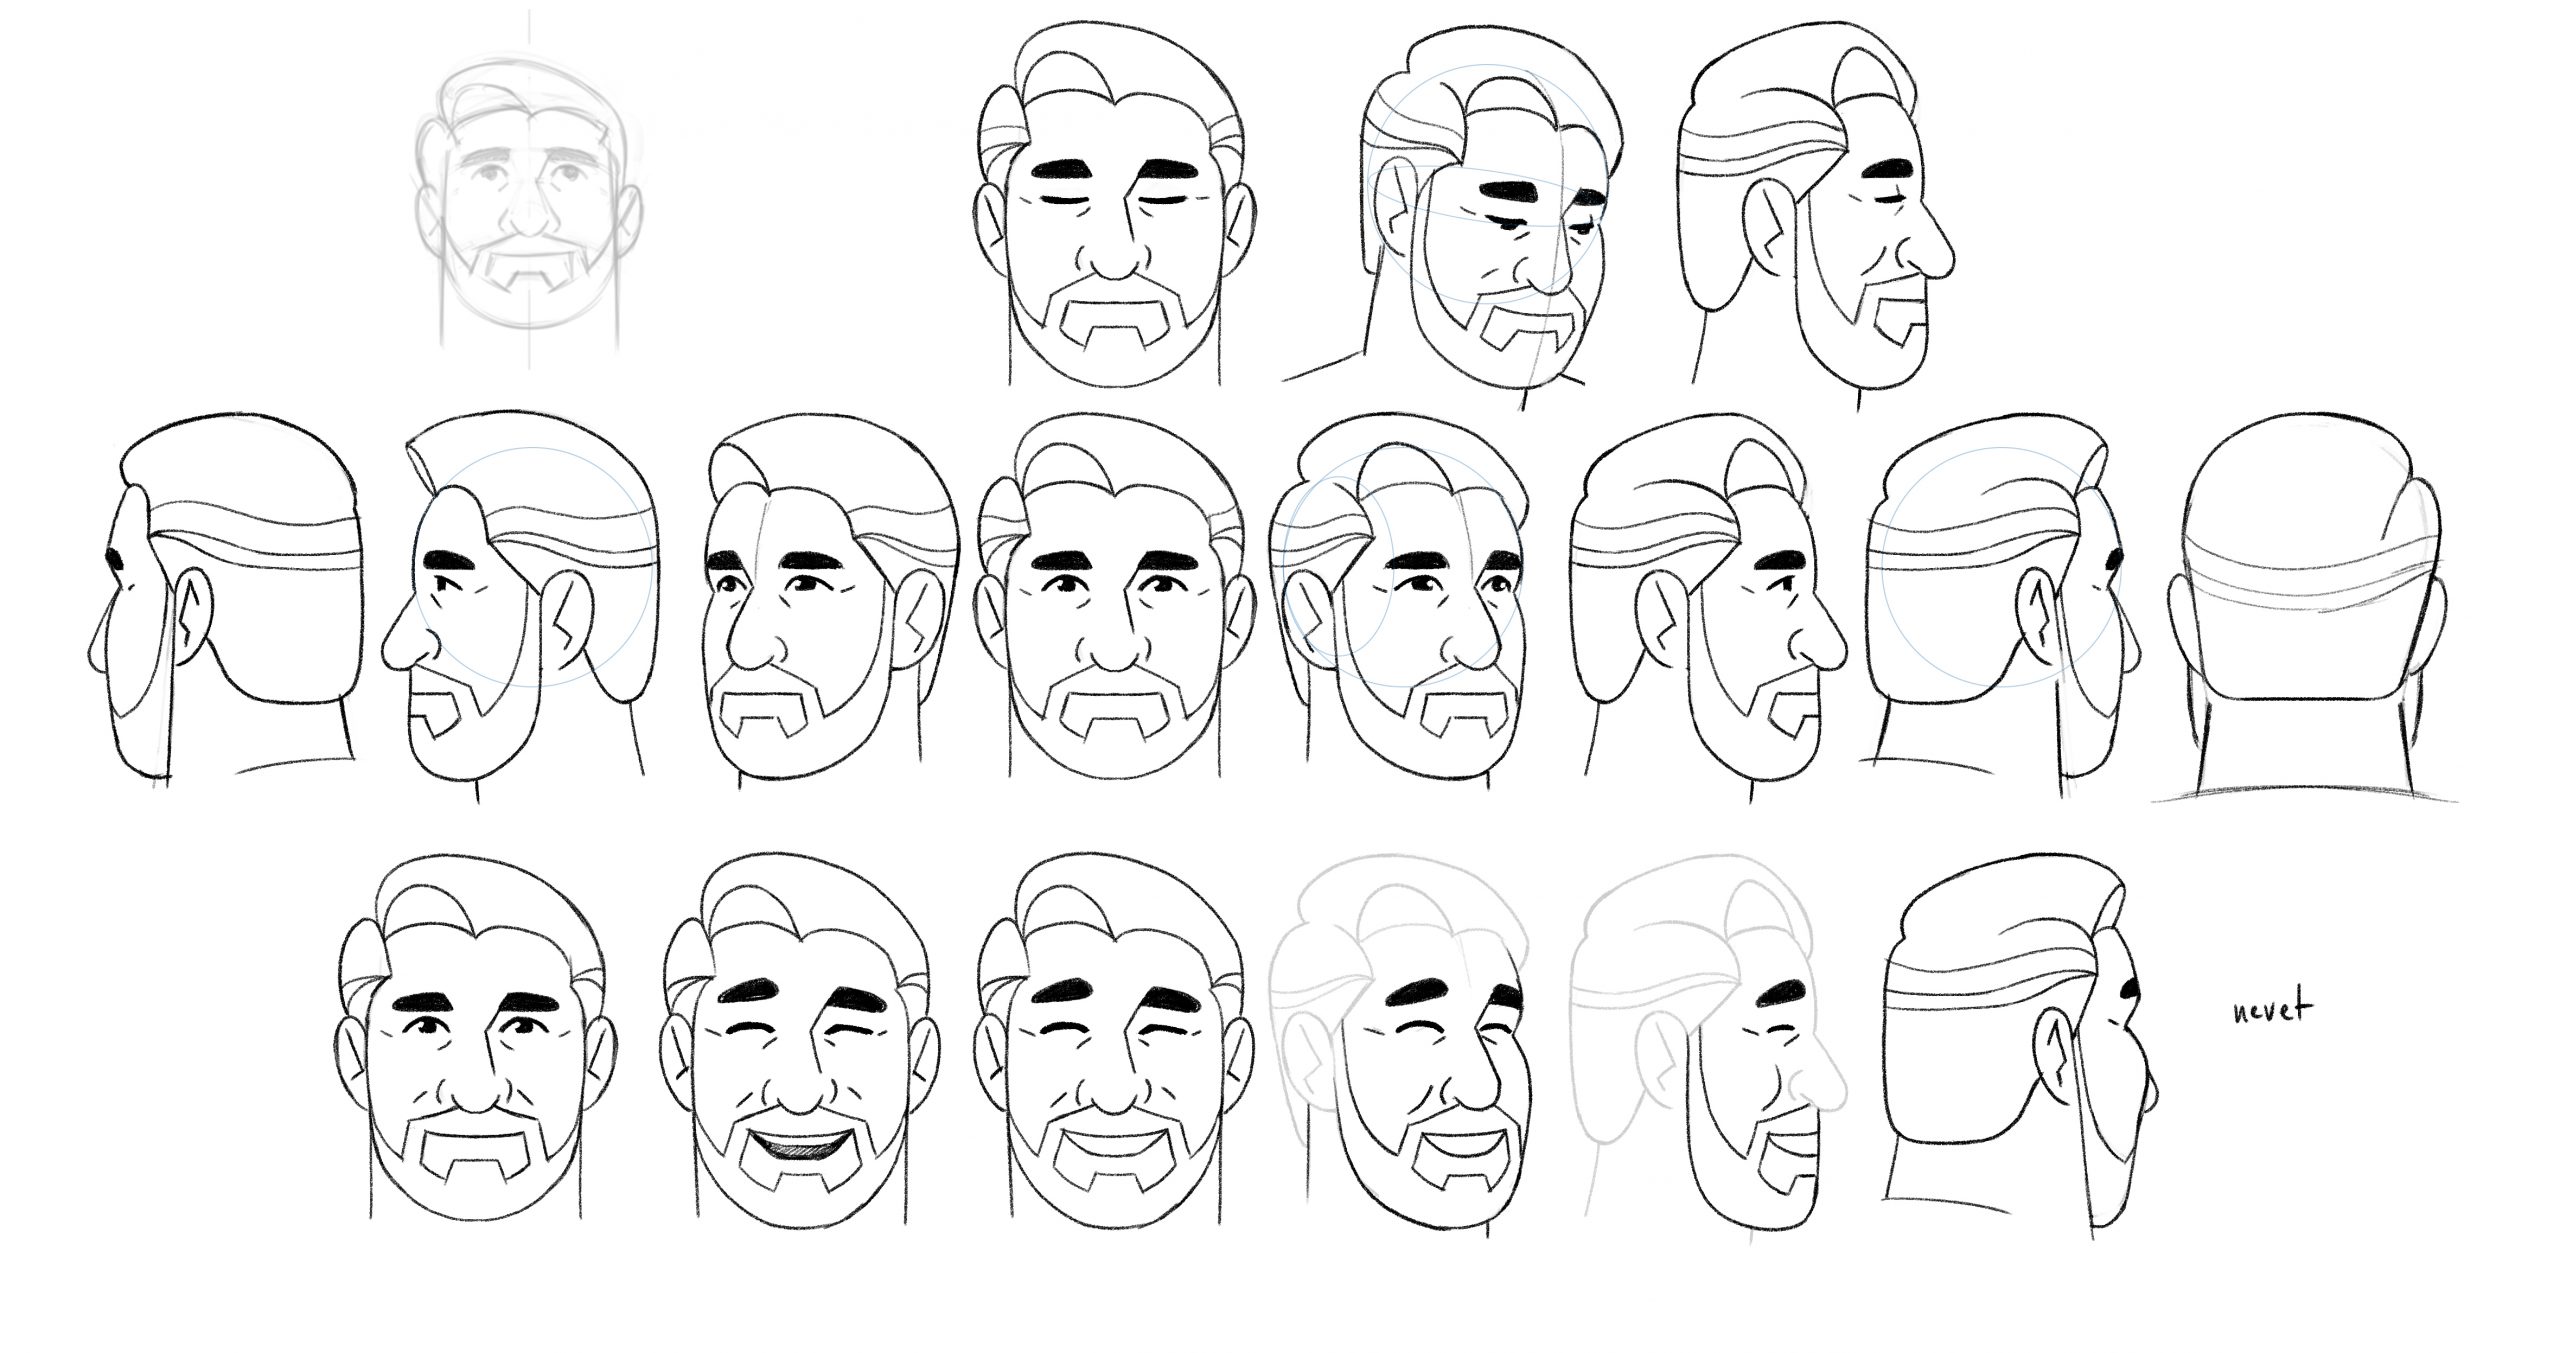 trulicity_characterdesign_v03Heads